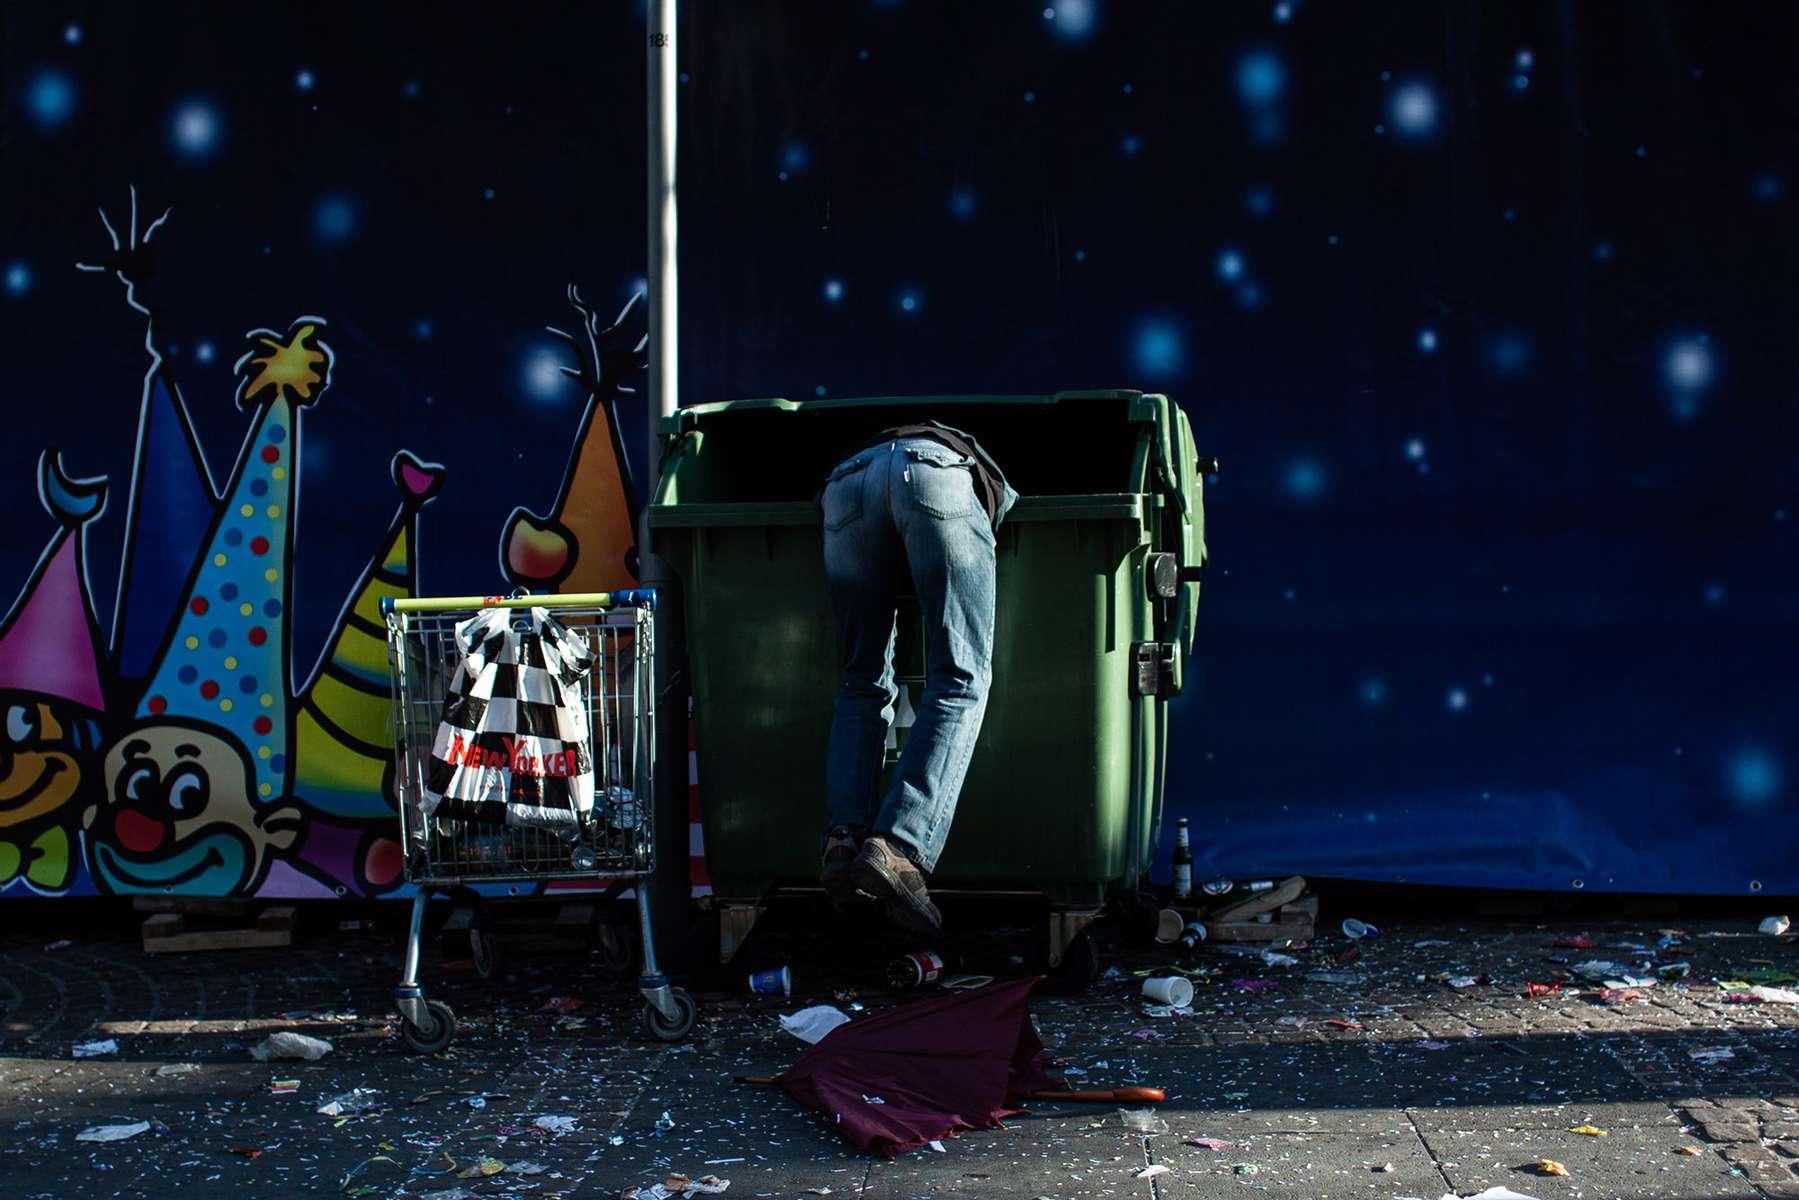 During the Rosenmontag carnival parade in Mainz in Germany a man is hanging and scavenging inside a trash can. His legs and the trash can are faintly lit by the evening sun